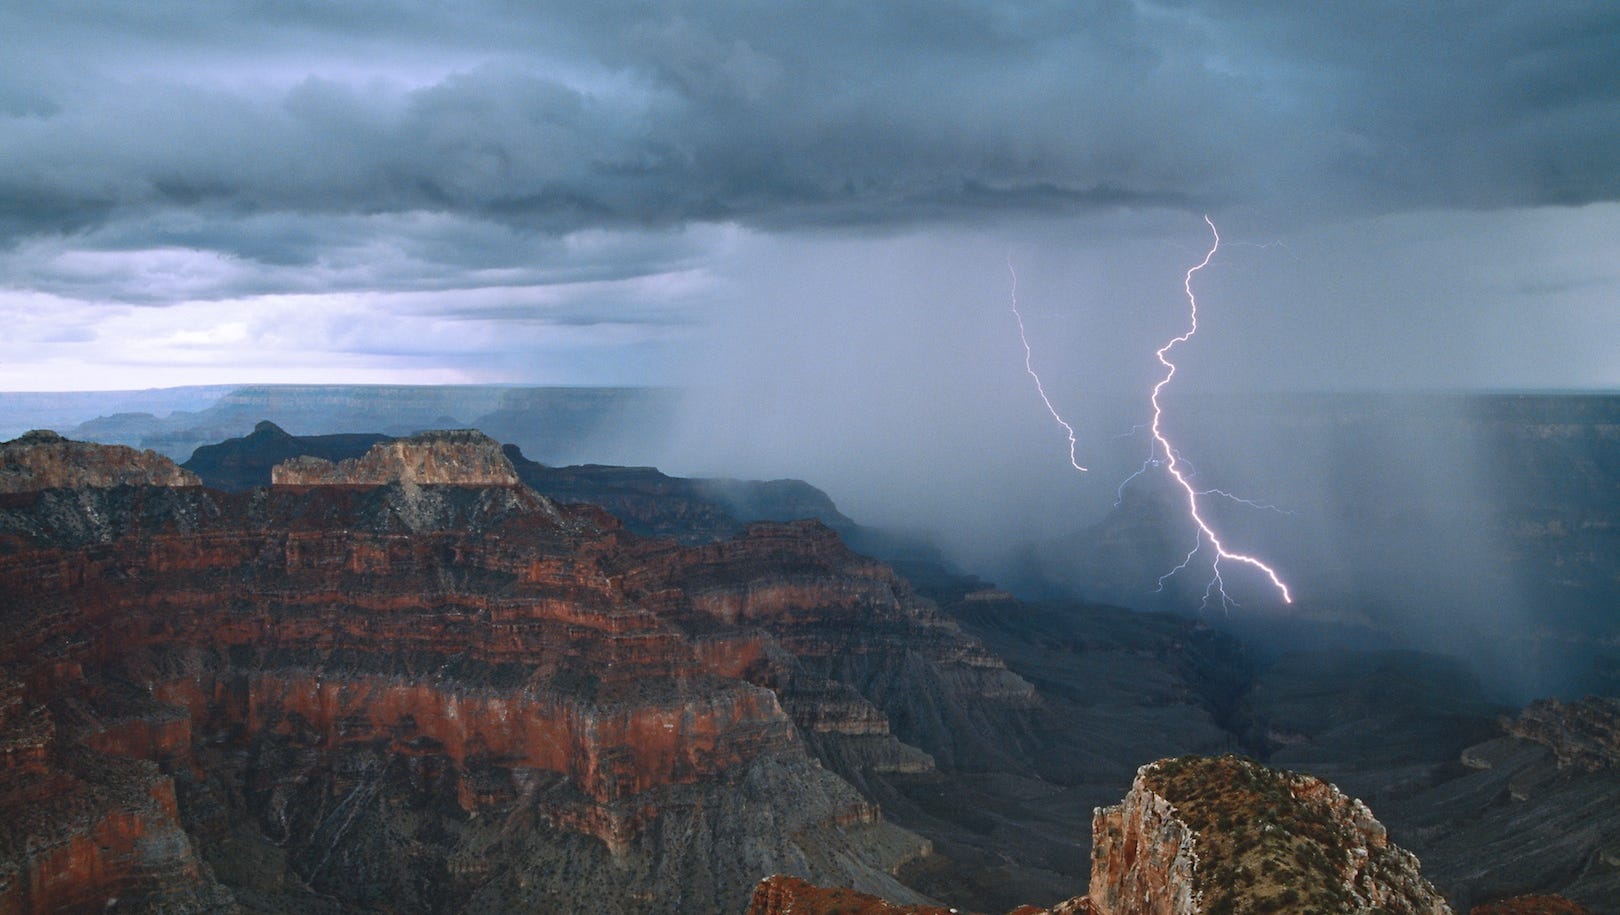 Grand Canyon has most lightning strikes among popular national parks